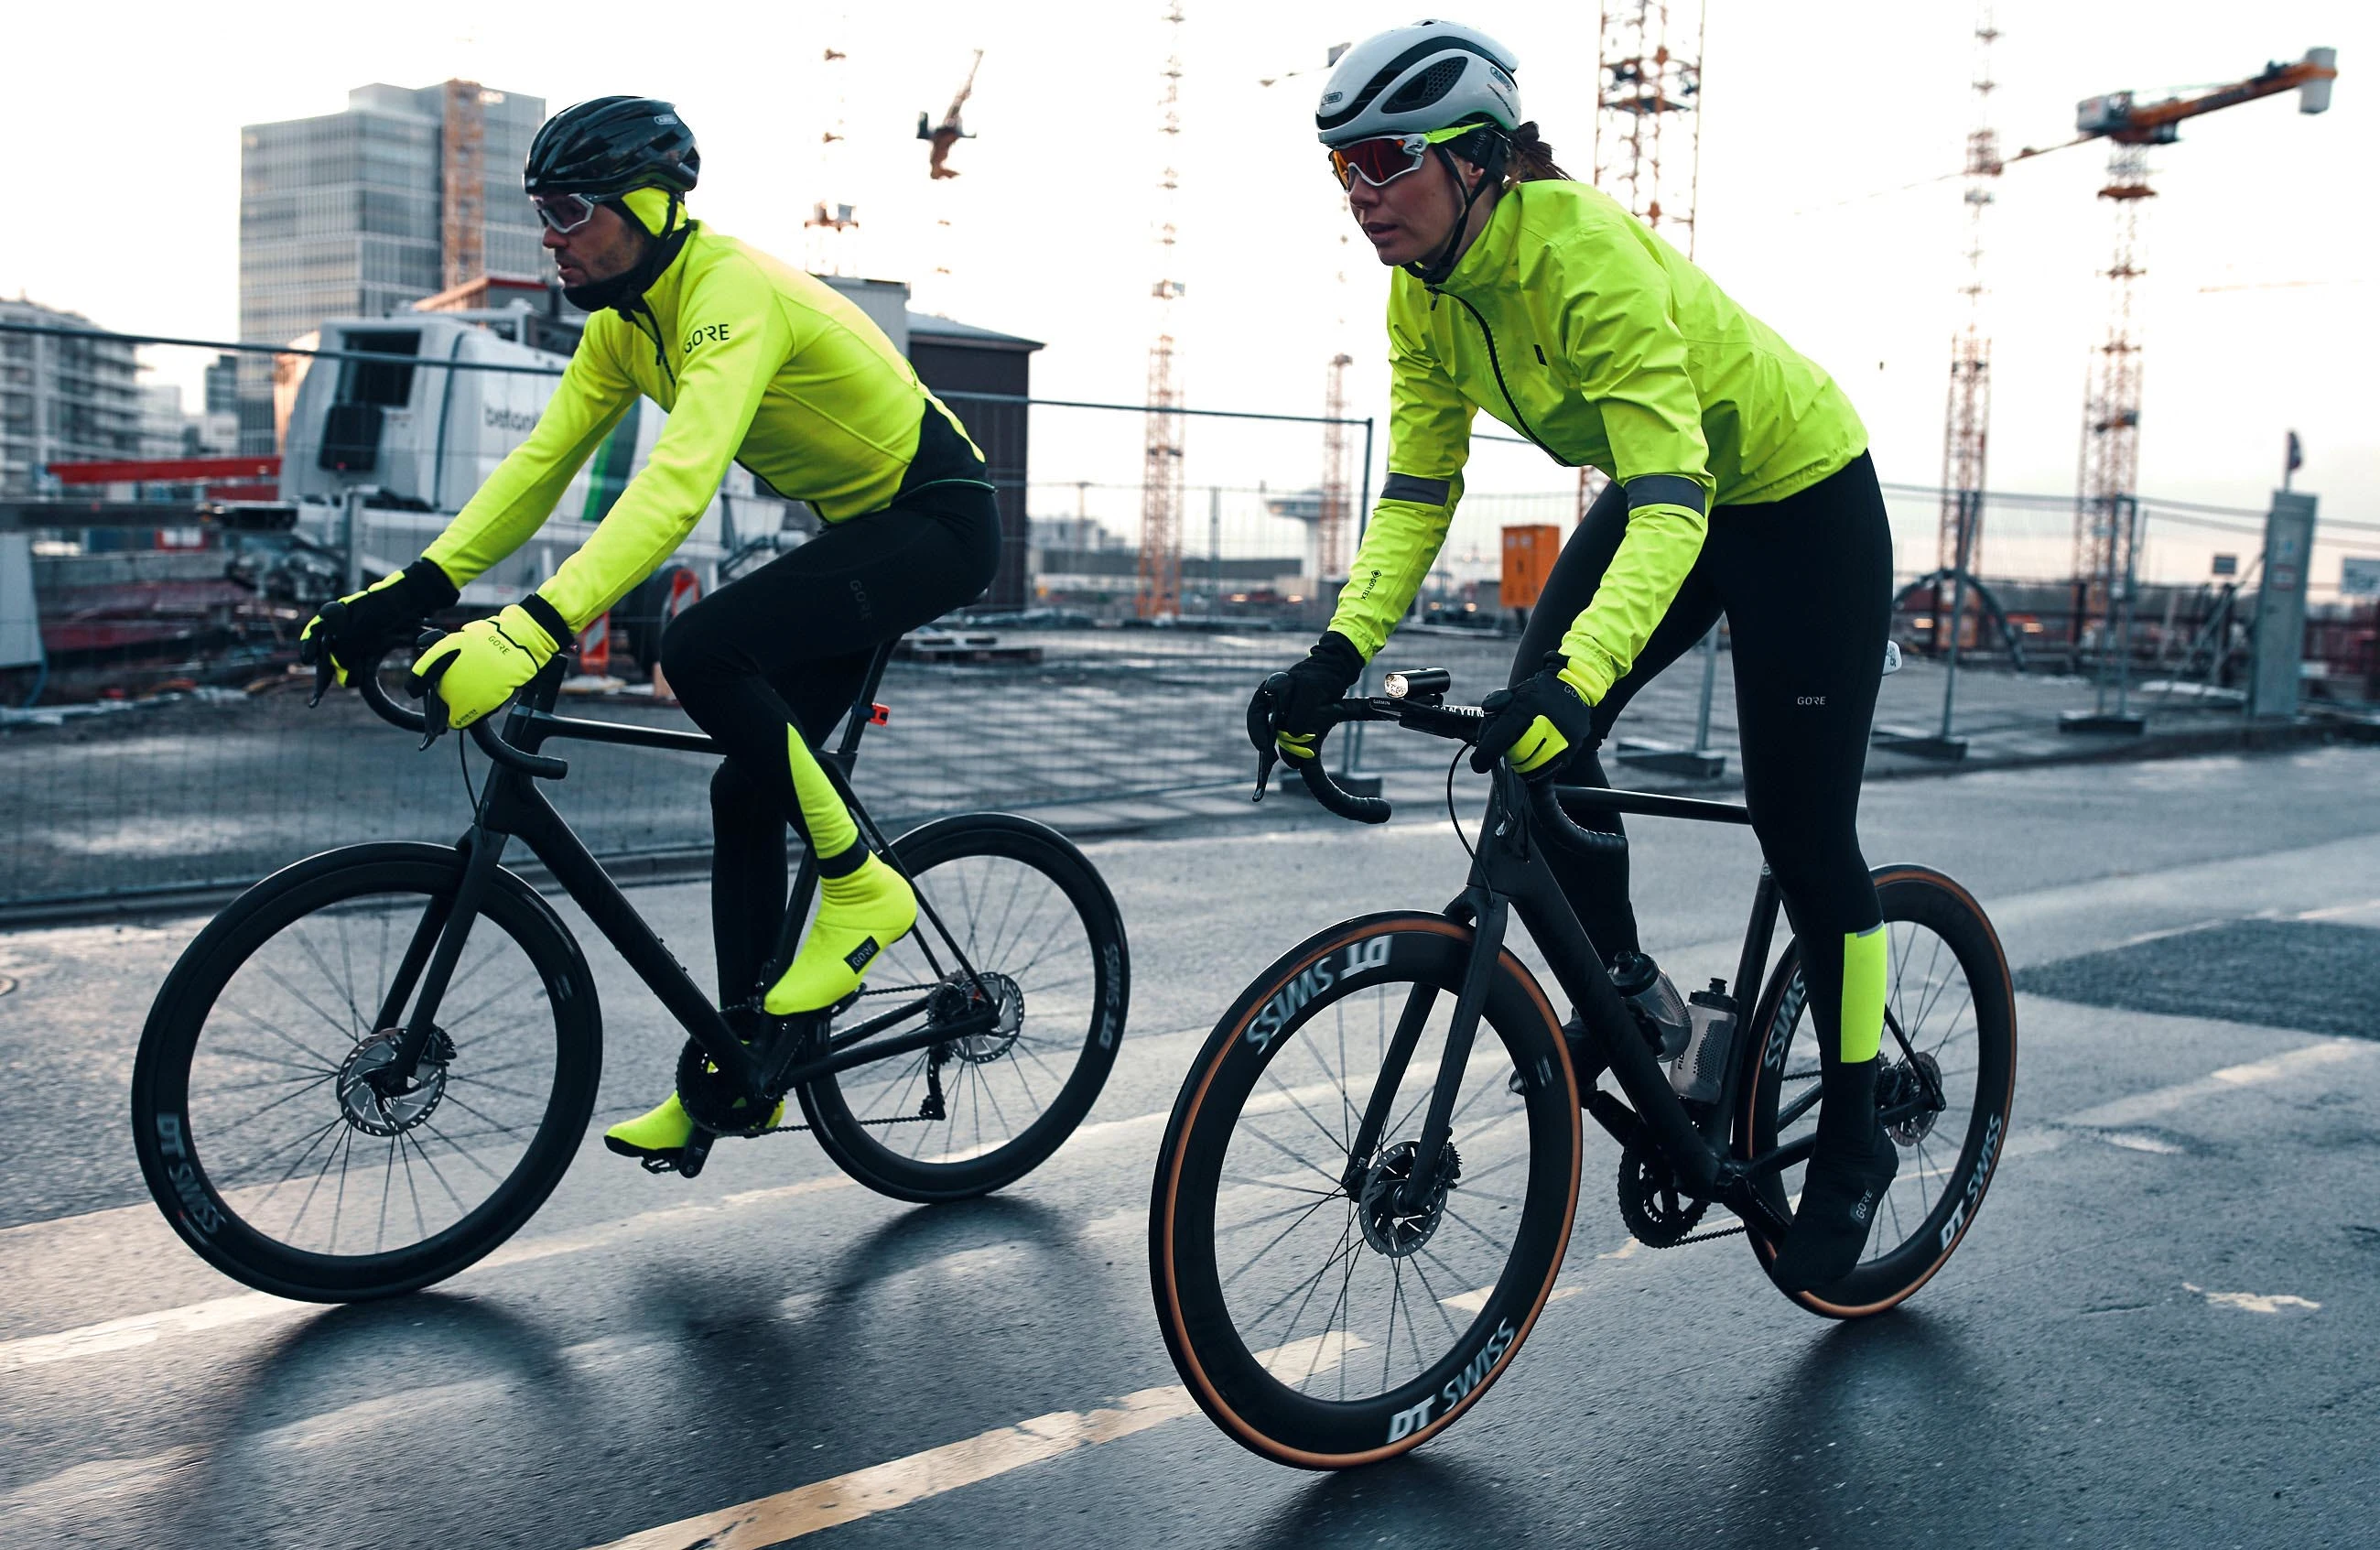 Eurocycles Winter Cycling Clothes Guide - Eurocycles